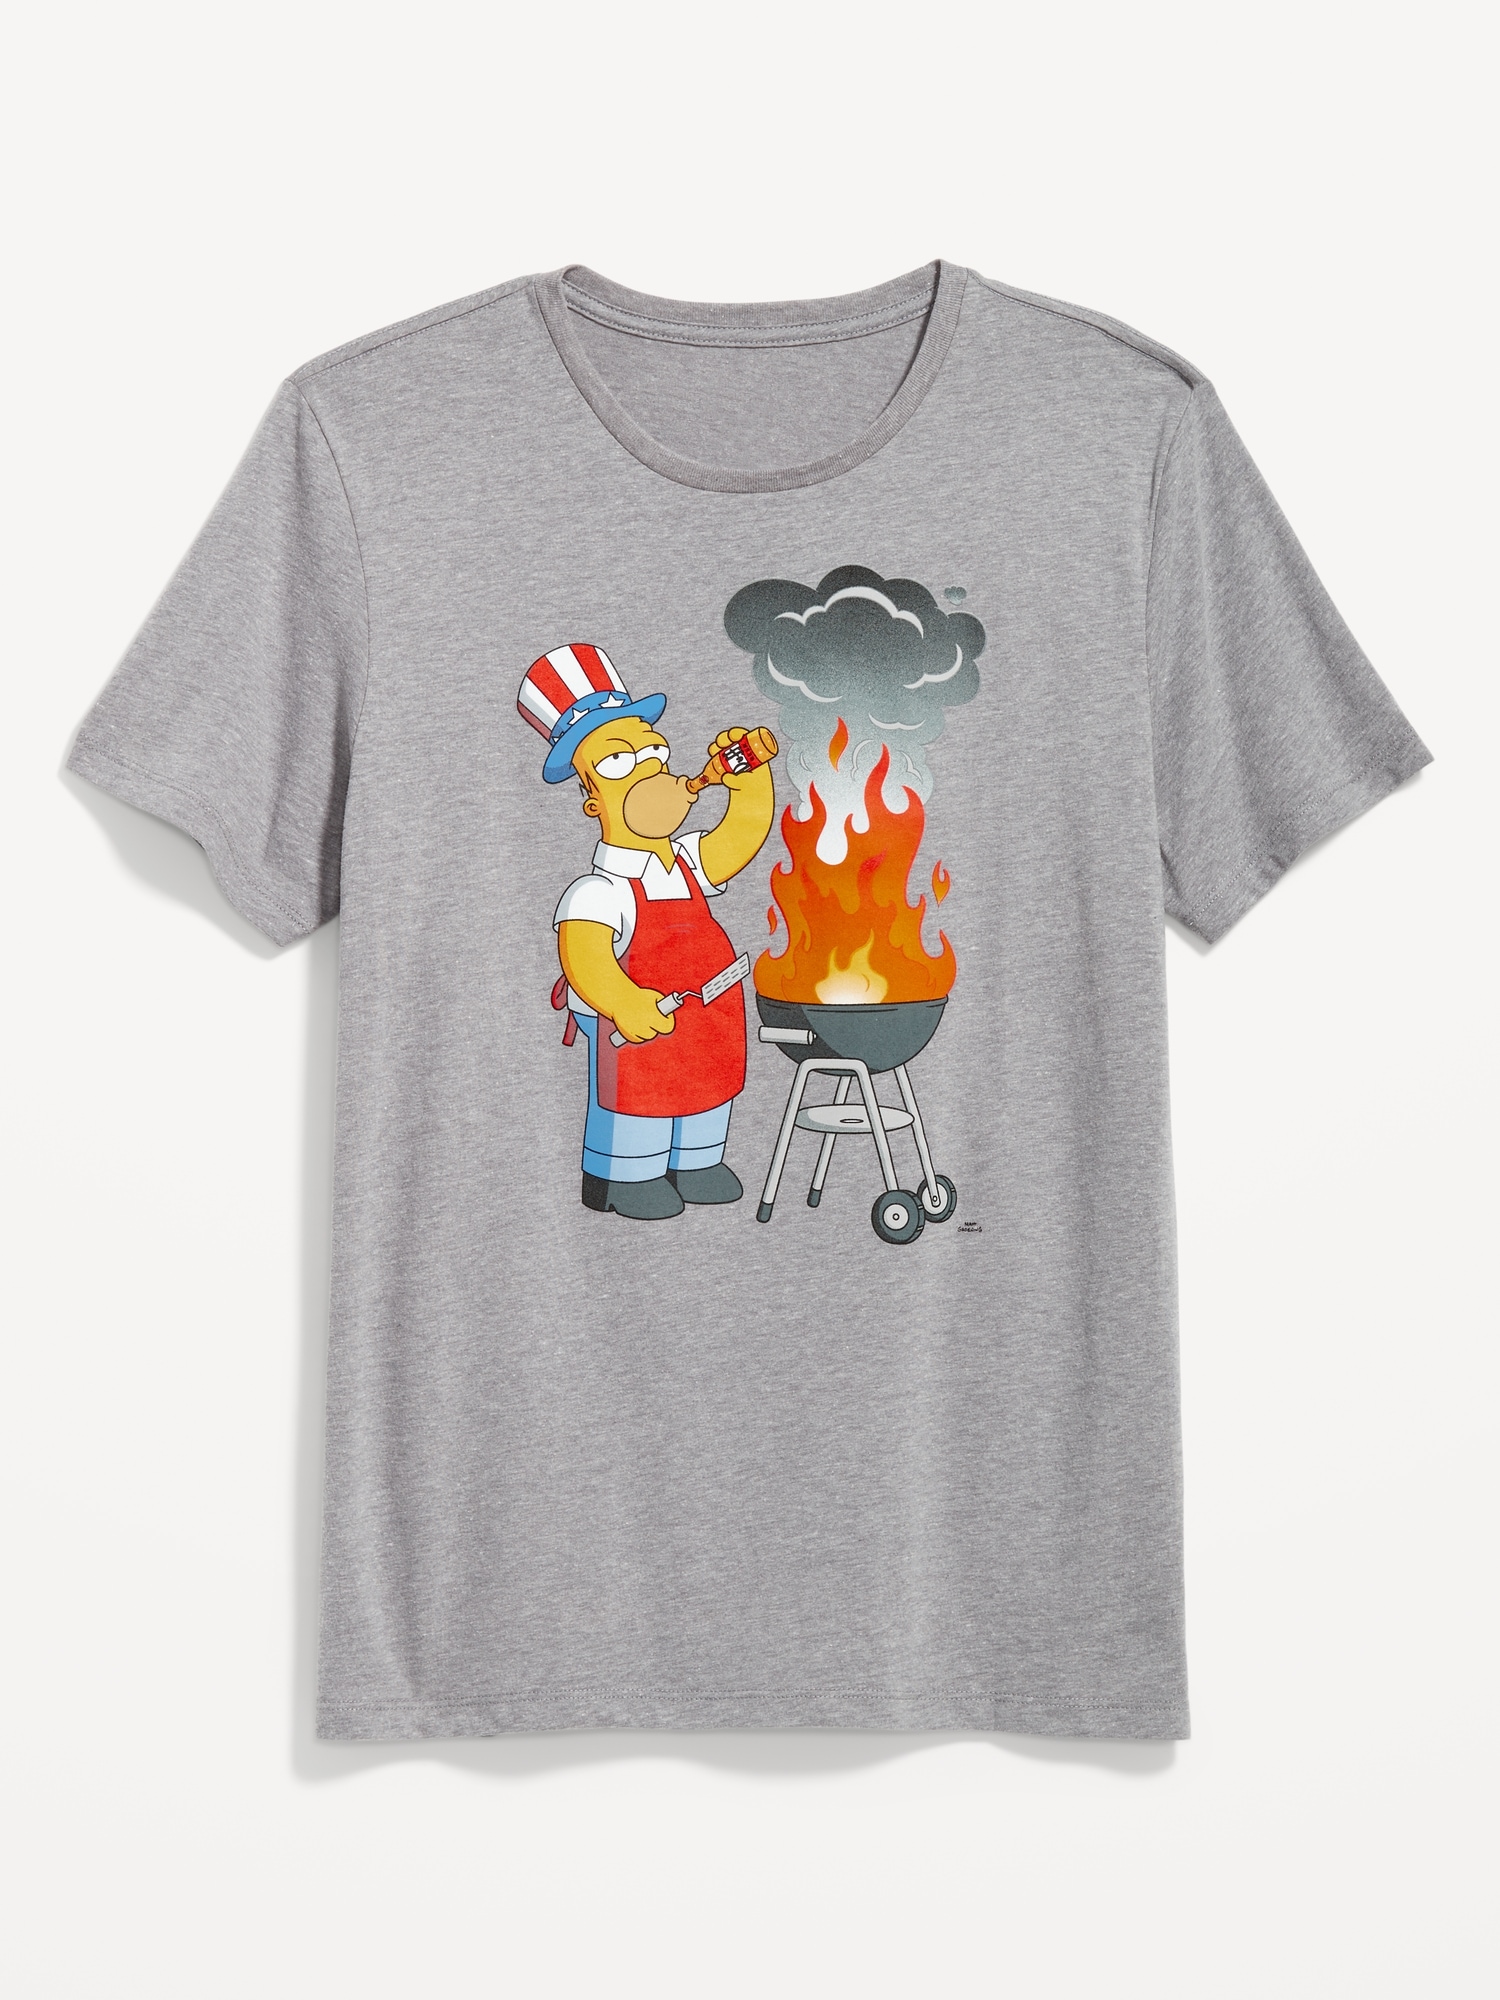 The Simpsons™ Matching Americana Gender-Neutral for Adults Old Navy